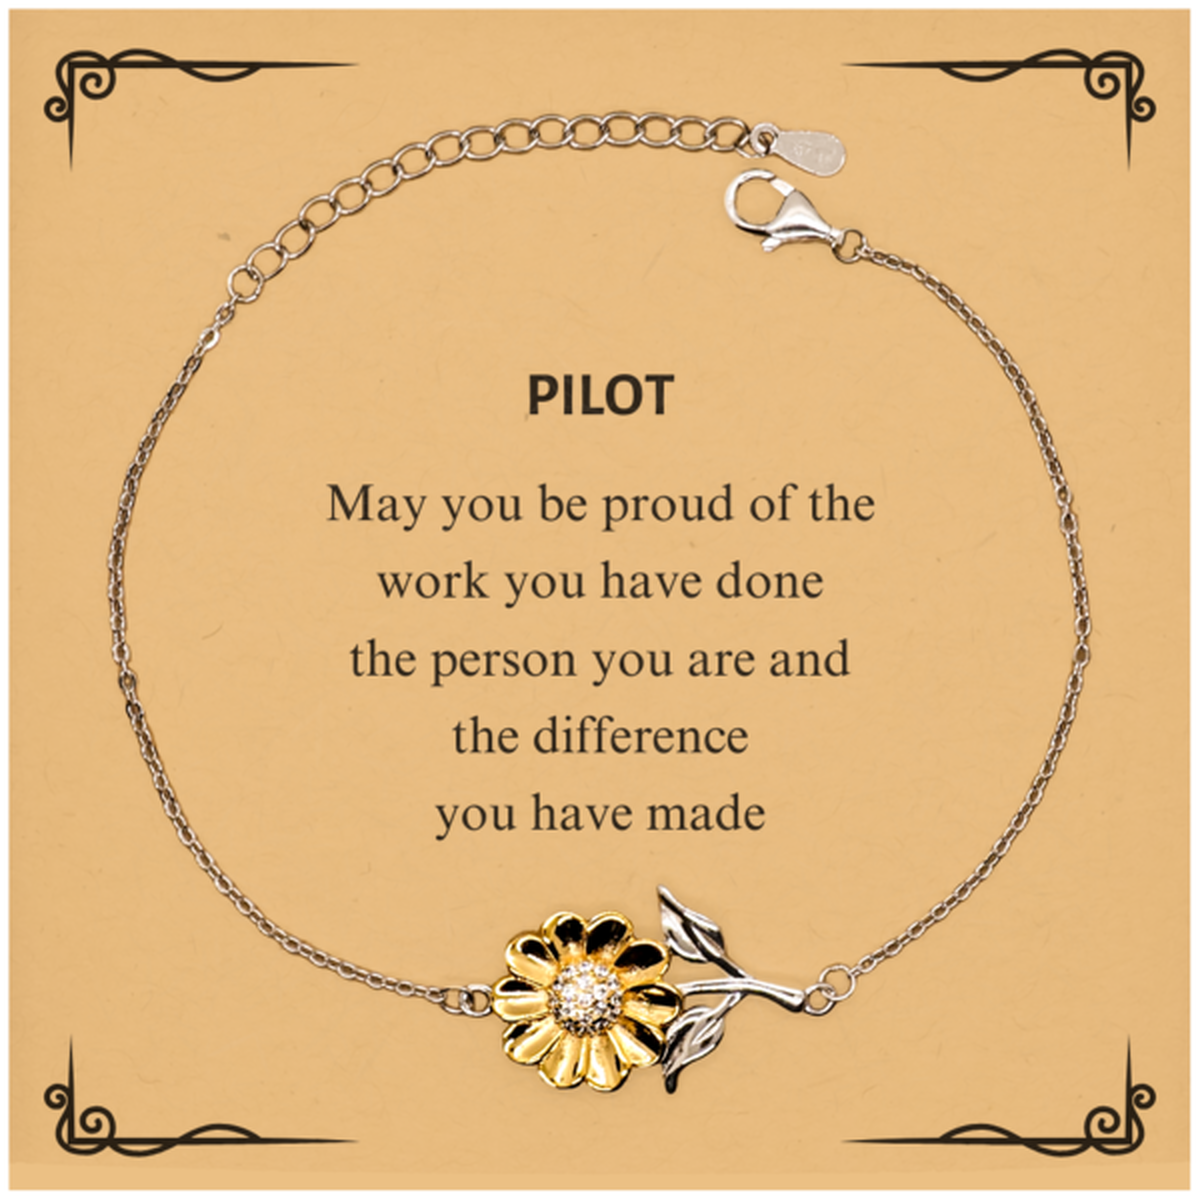 Pilot May you be proud of the work you have done, Retirement Pilot Sunflower Bracelet for Colleague Appreciation Gifts Amazing for Pilot